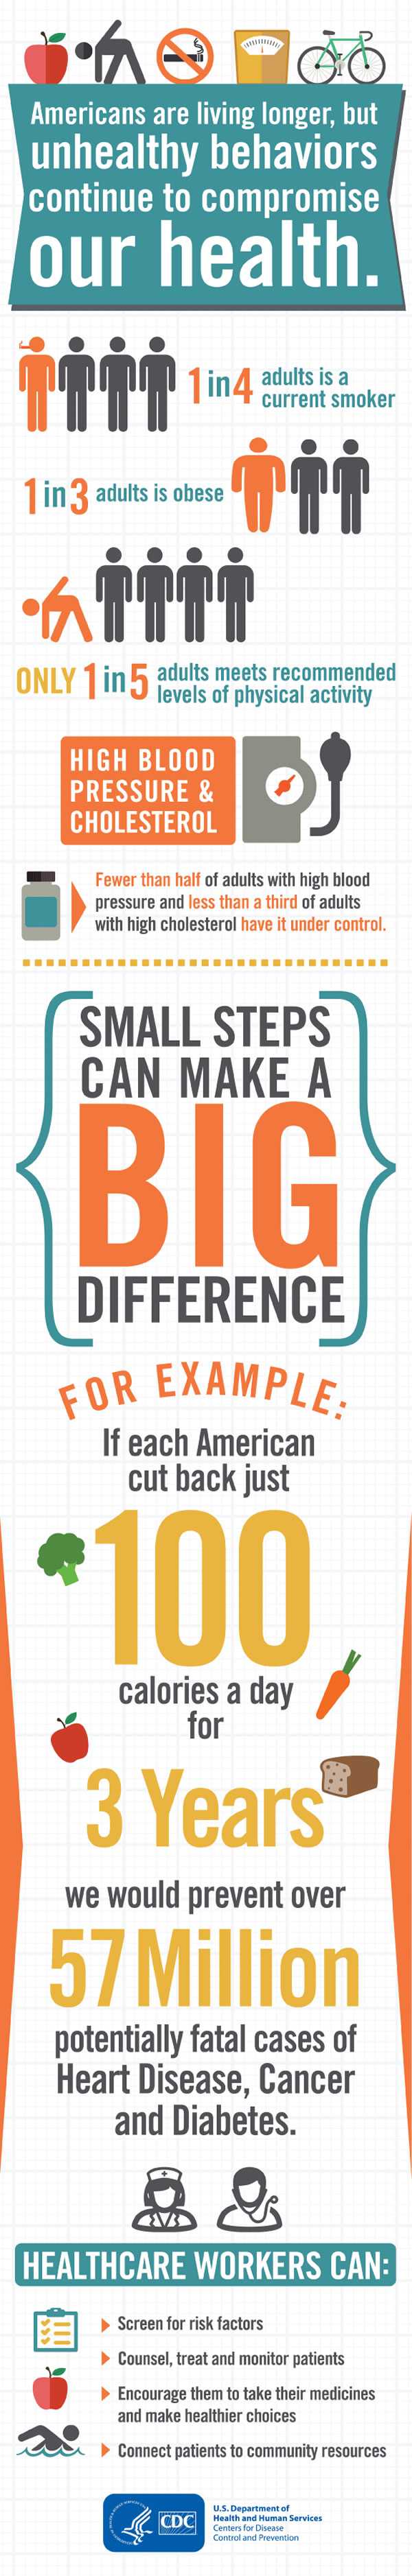 Small steps/big difference infographic. Text follows image.